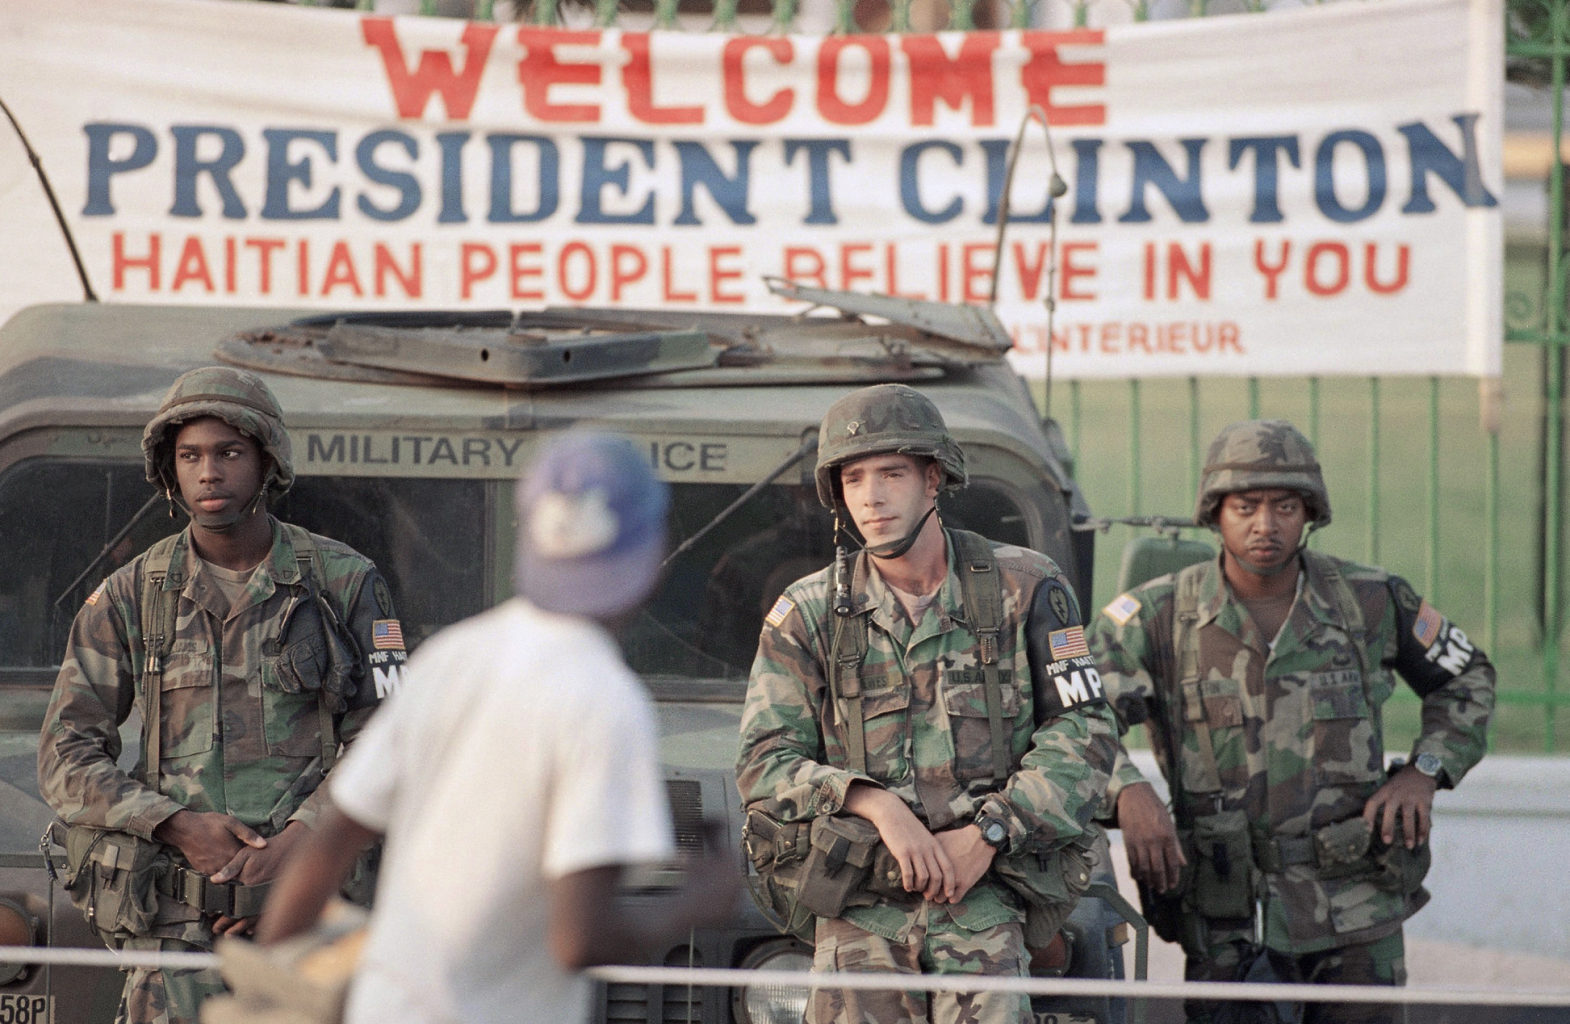 25th Division Military Police in Haiti as part of the multinational force,1994